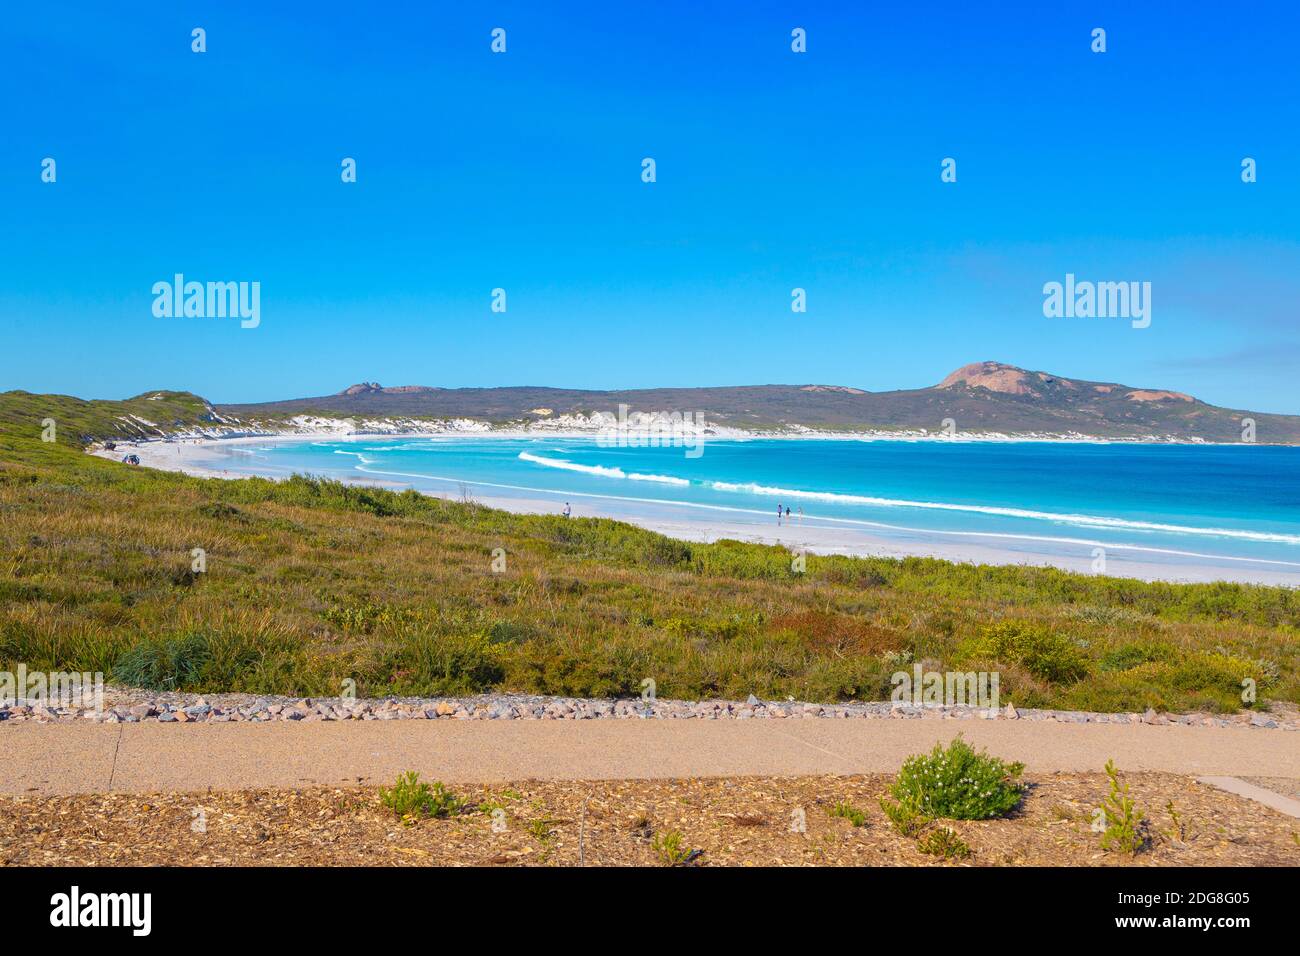 The beautiful Lucky Bay in the Cape Le Grand National Park east of Esperance, Western Australia Stock Photo